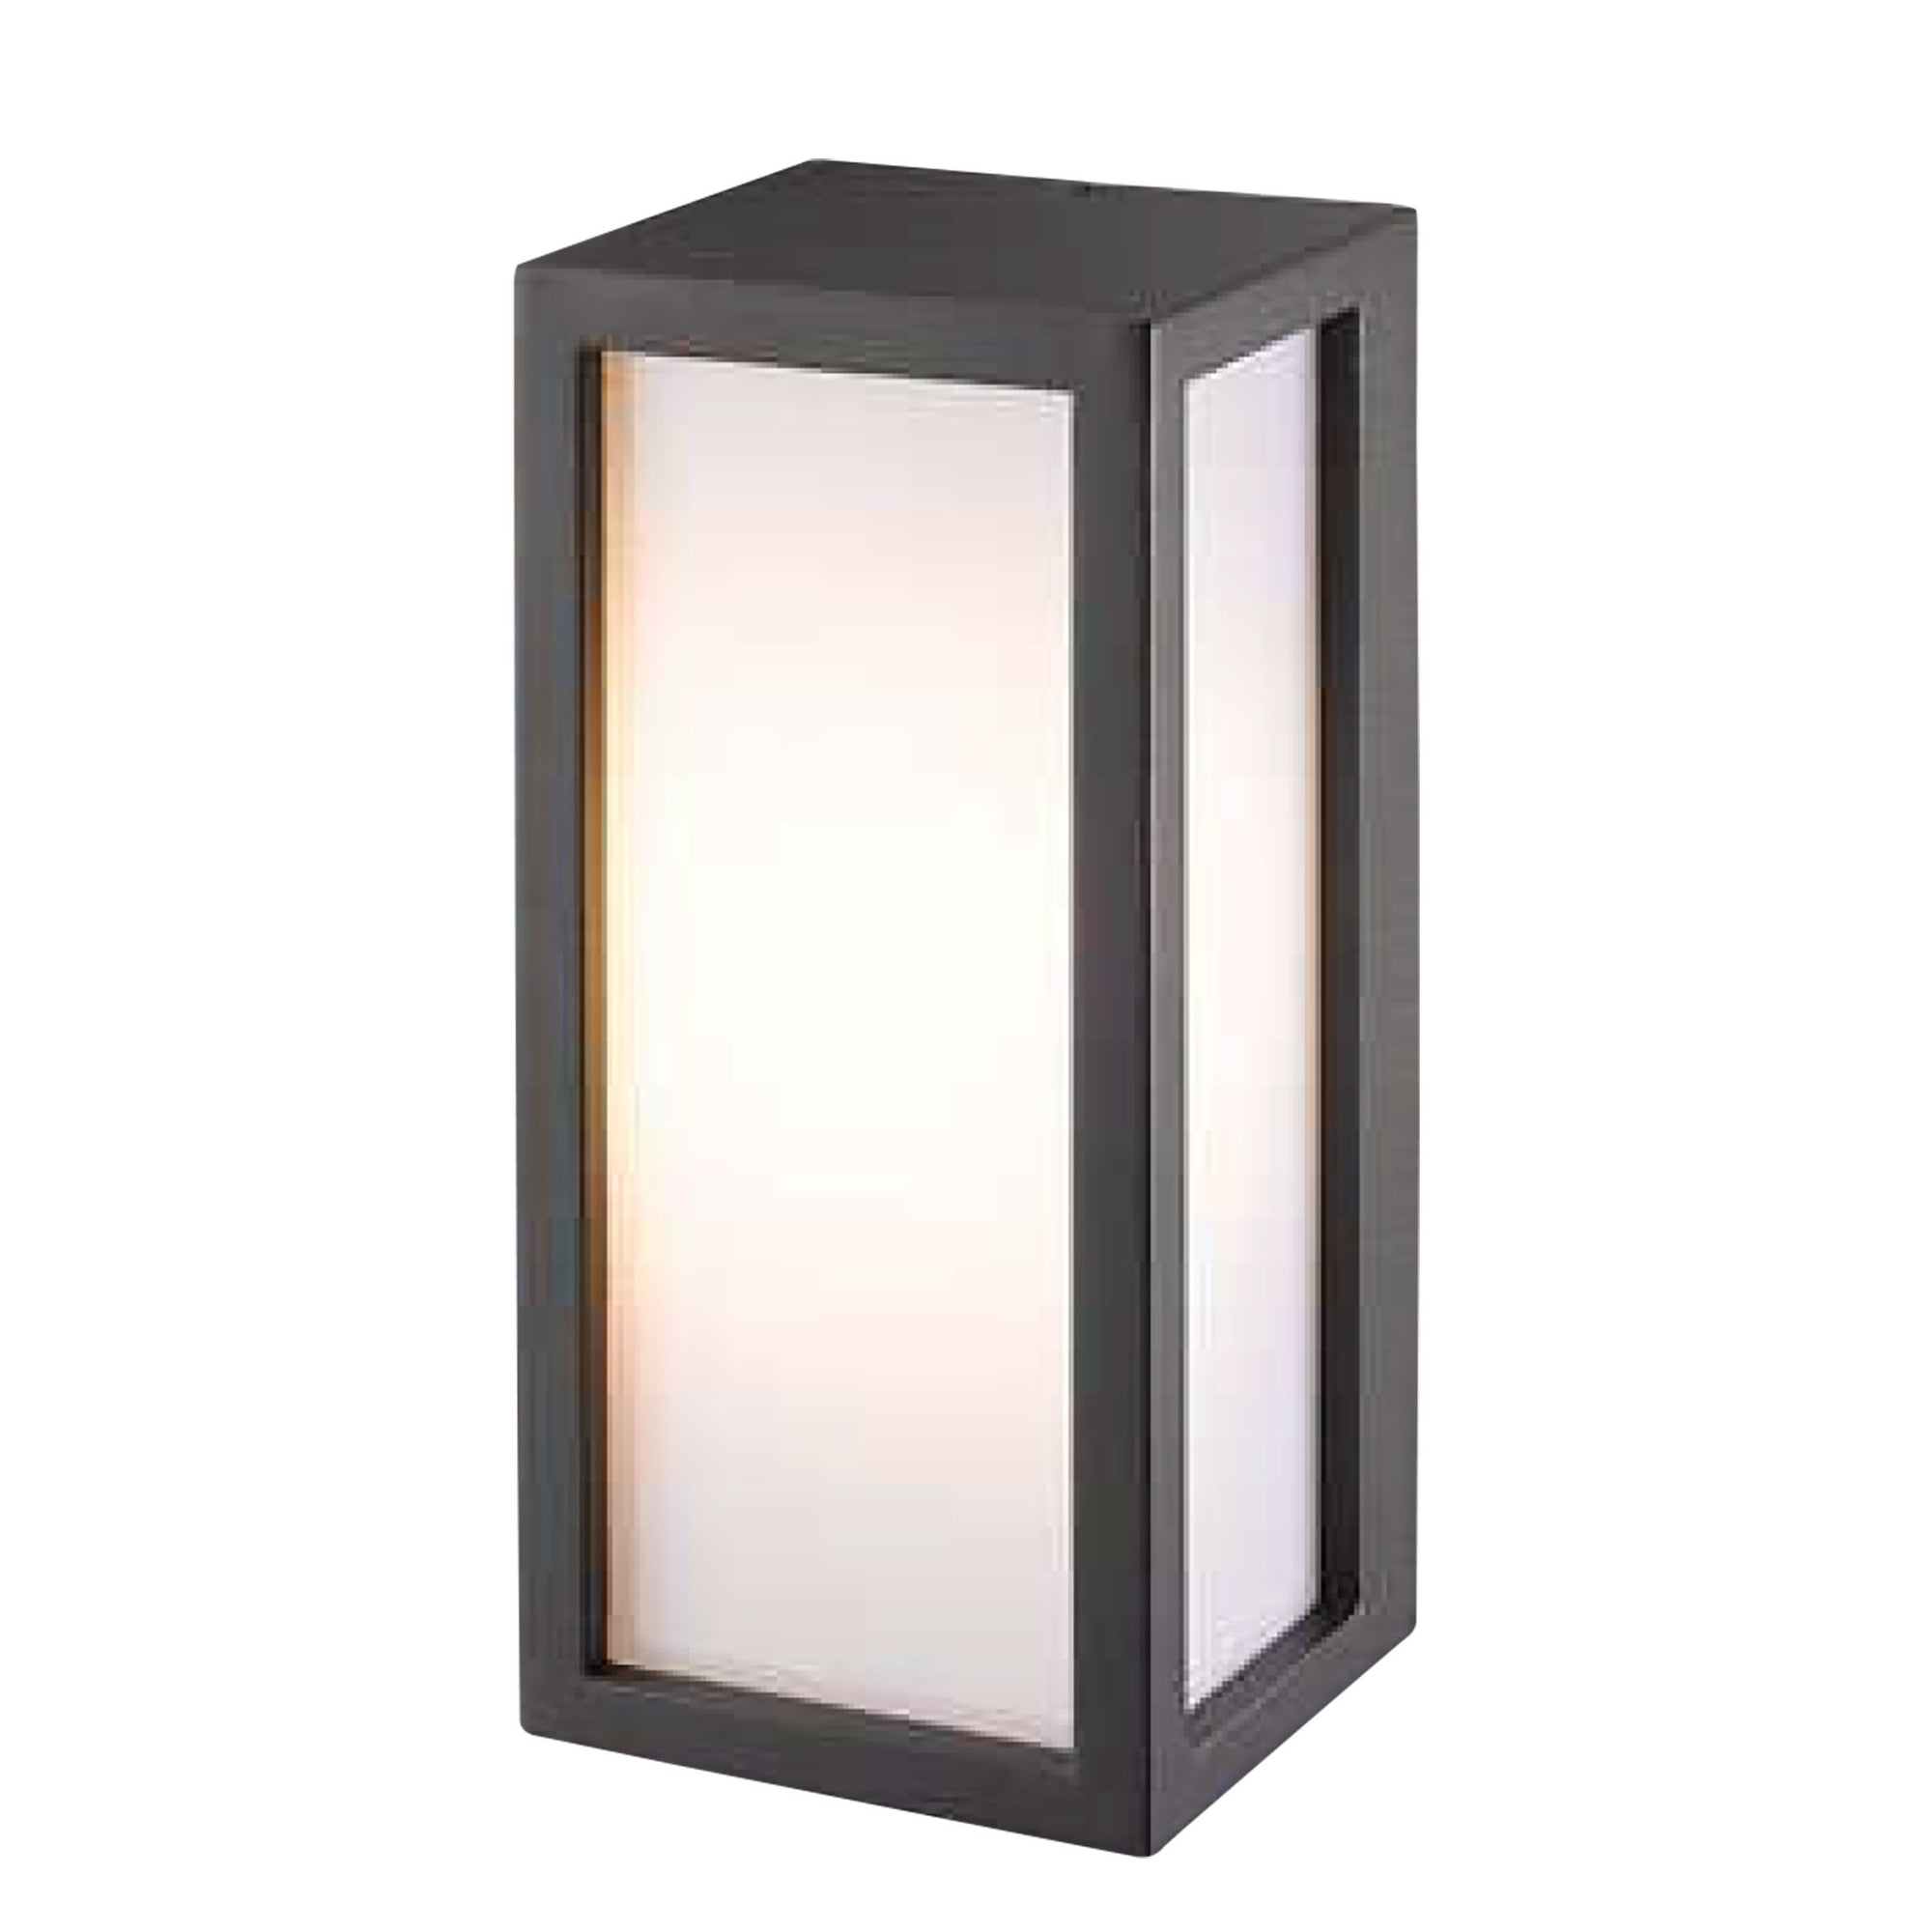 R-Bright LED Outdoor Wall Light Bangalore